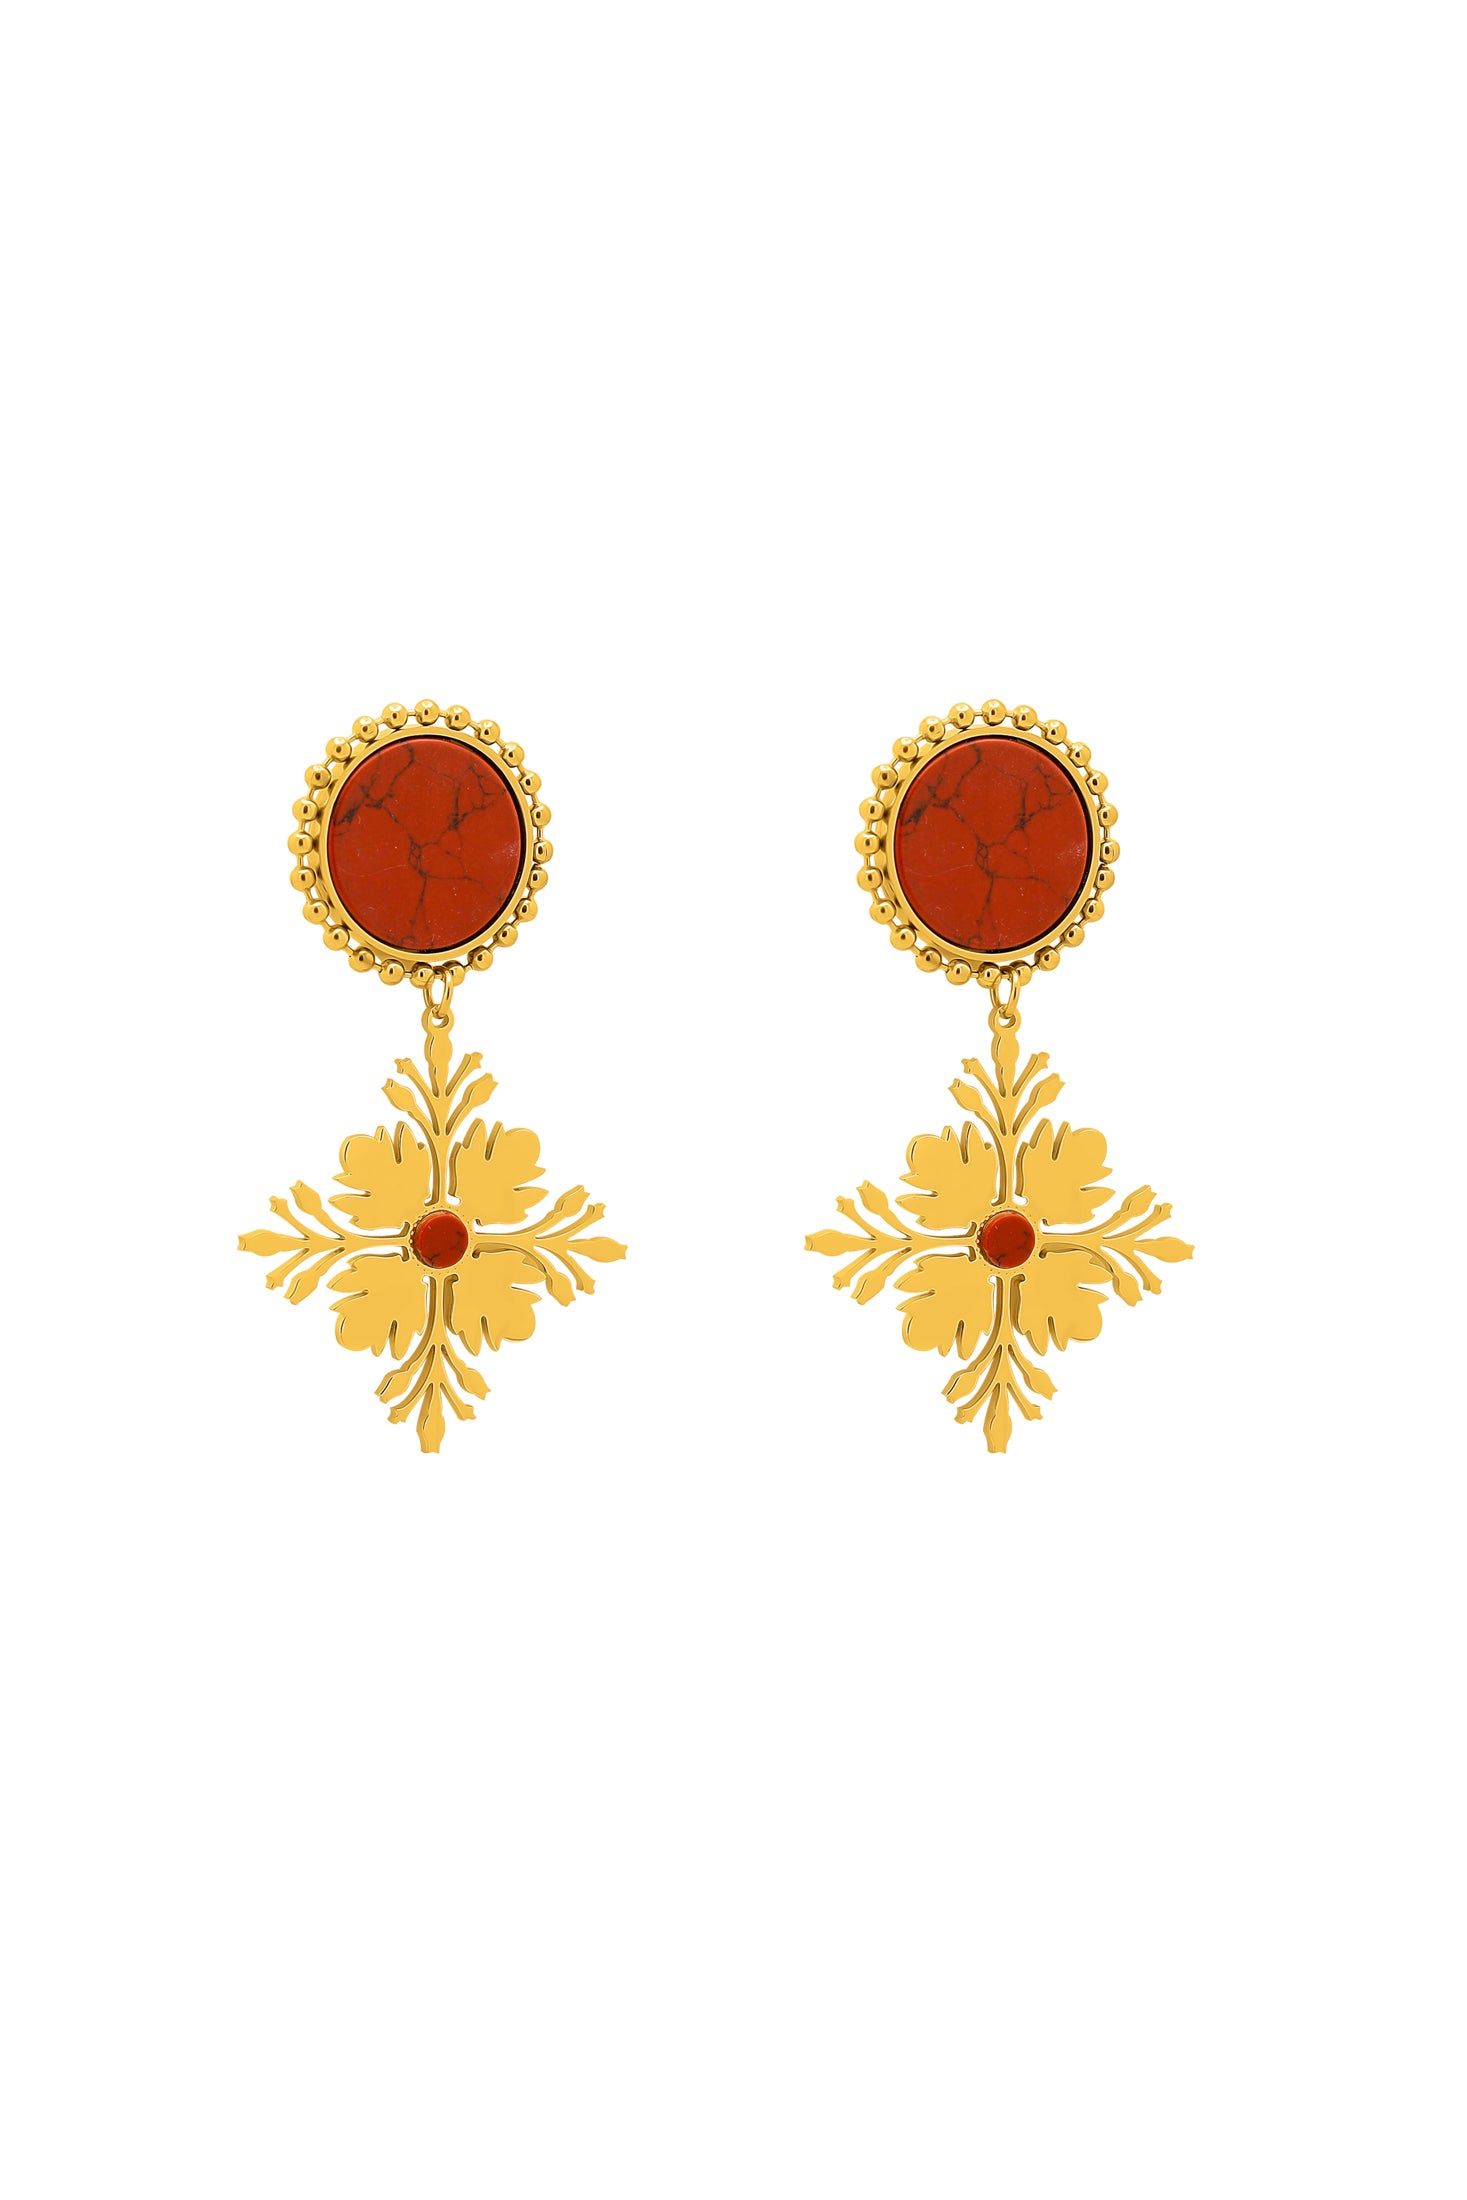 Maltese Tile Pattern Stud Earrings with Flame Stone